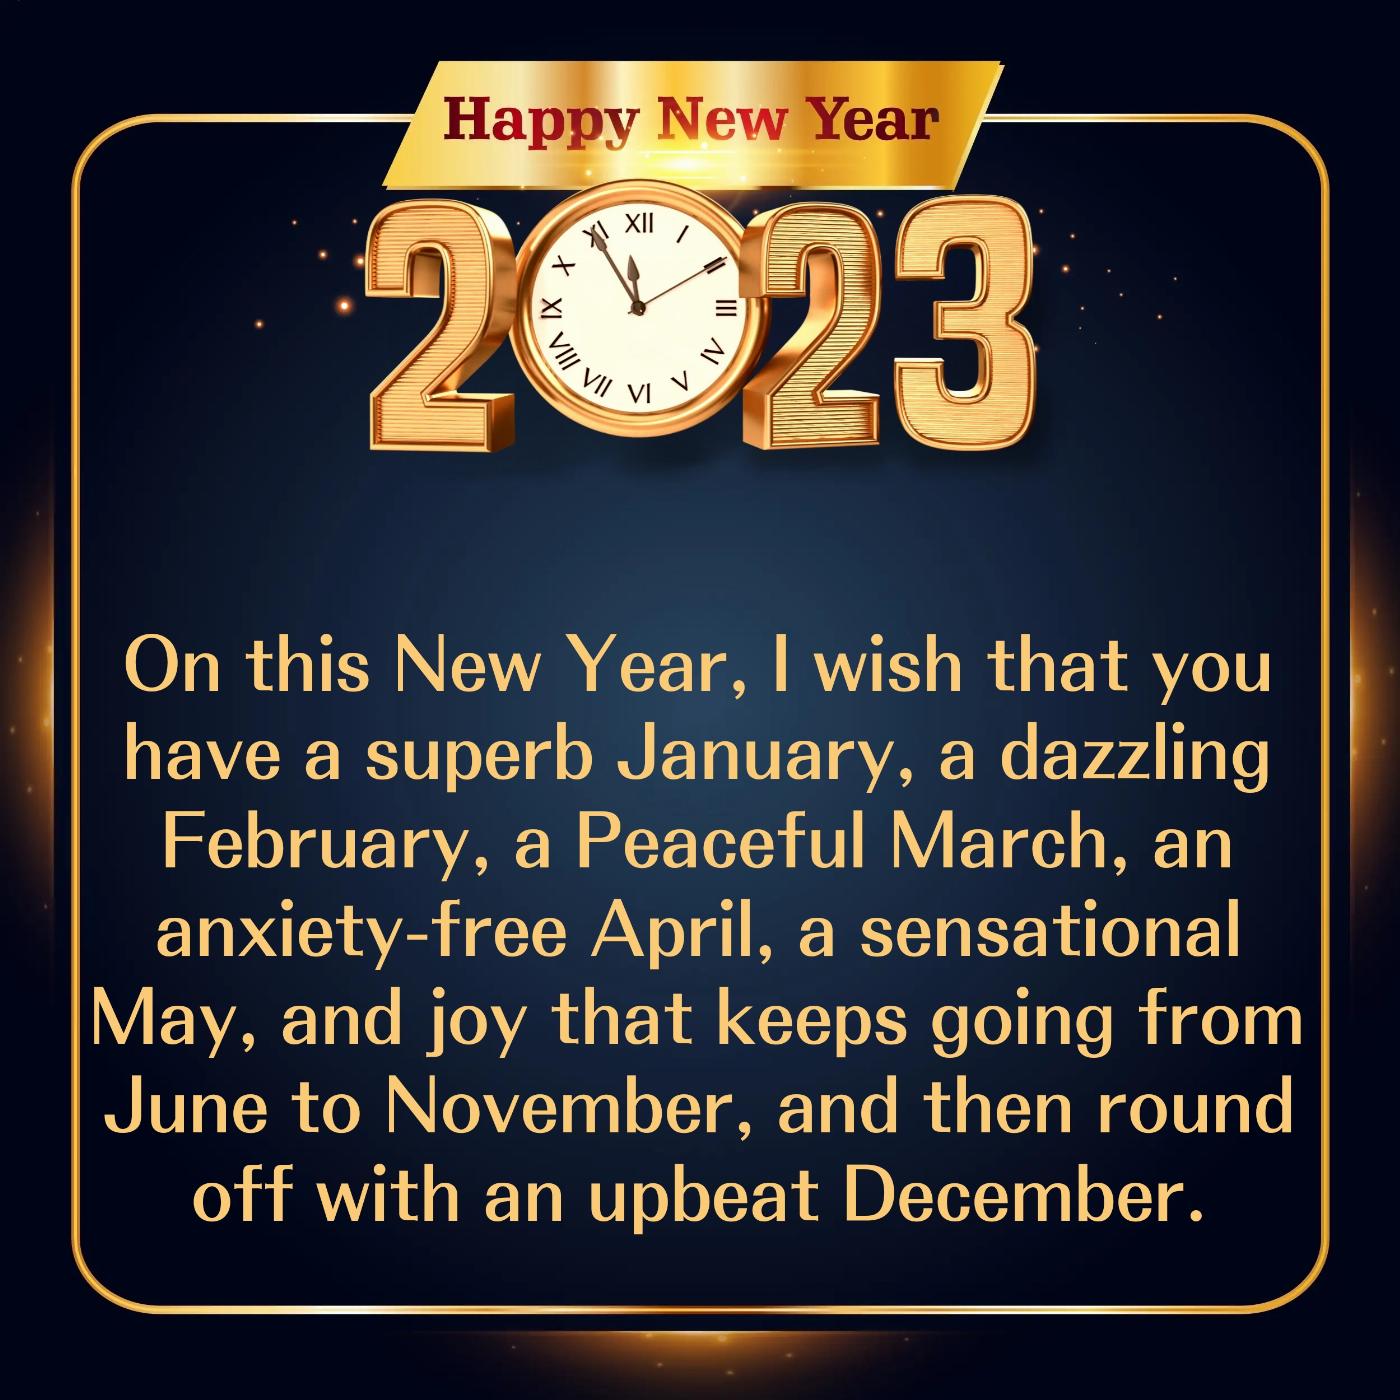 On this New Year I wish that you have a superb January